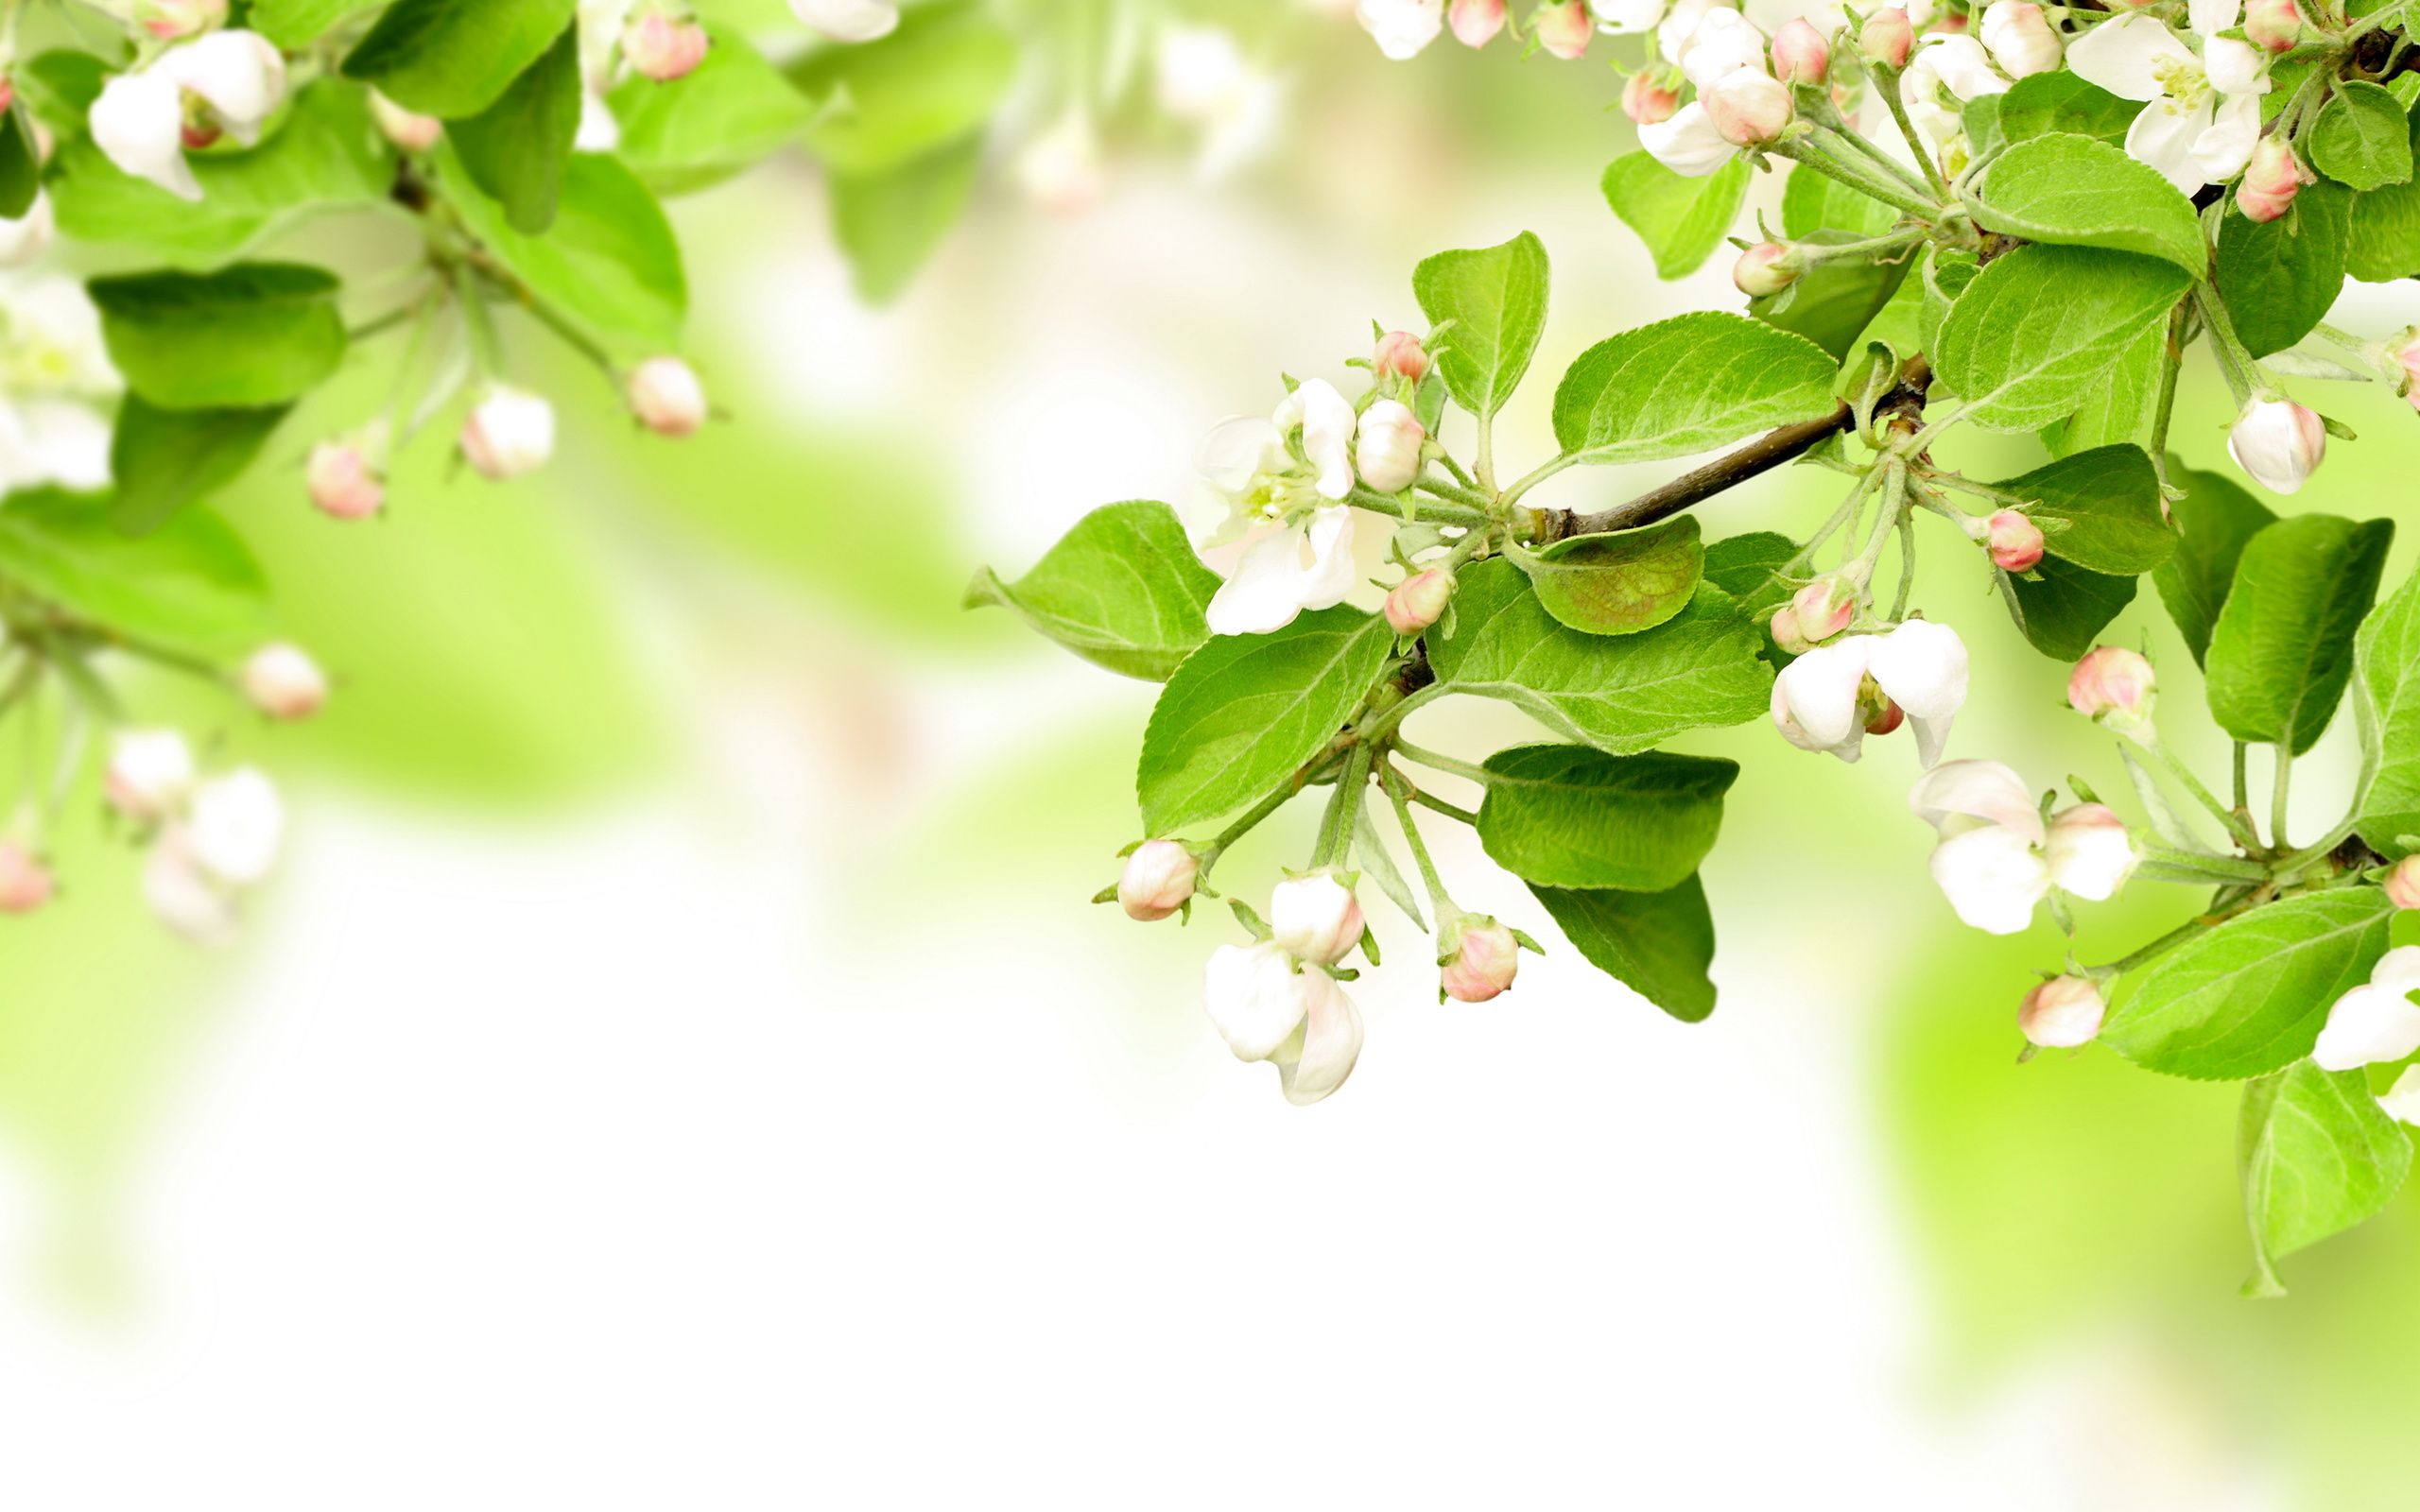 Leaves spring flowers apples branches blossom wallpaper